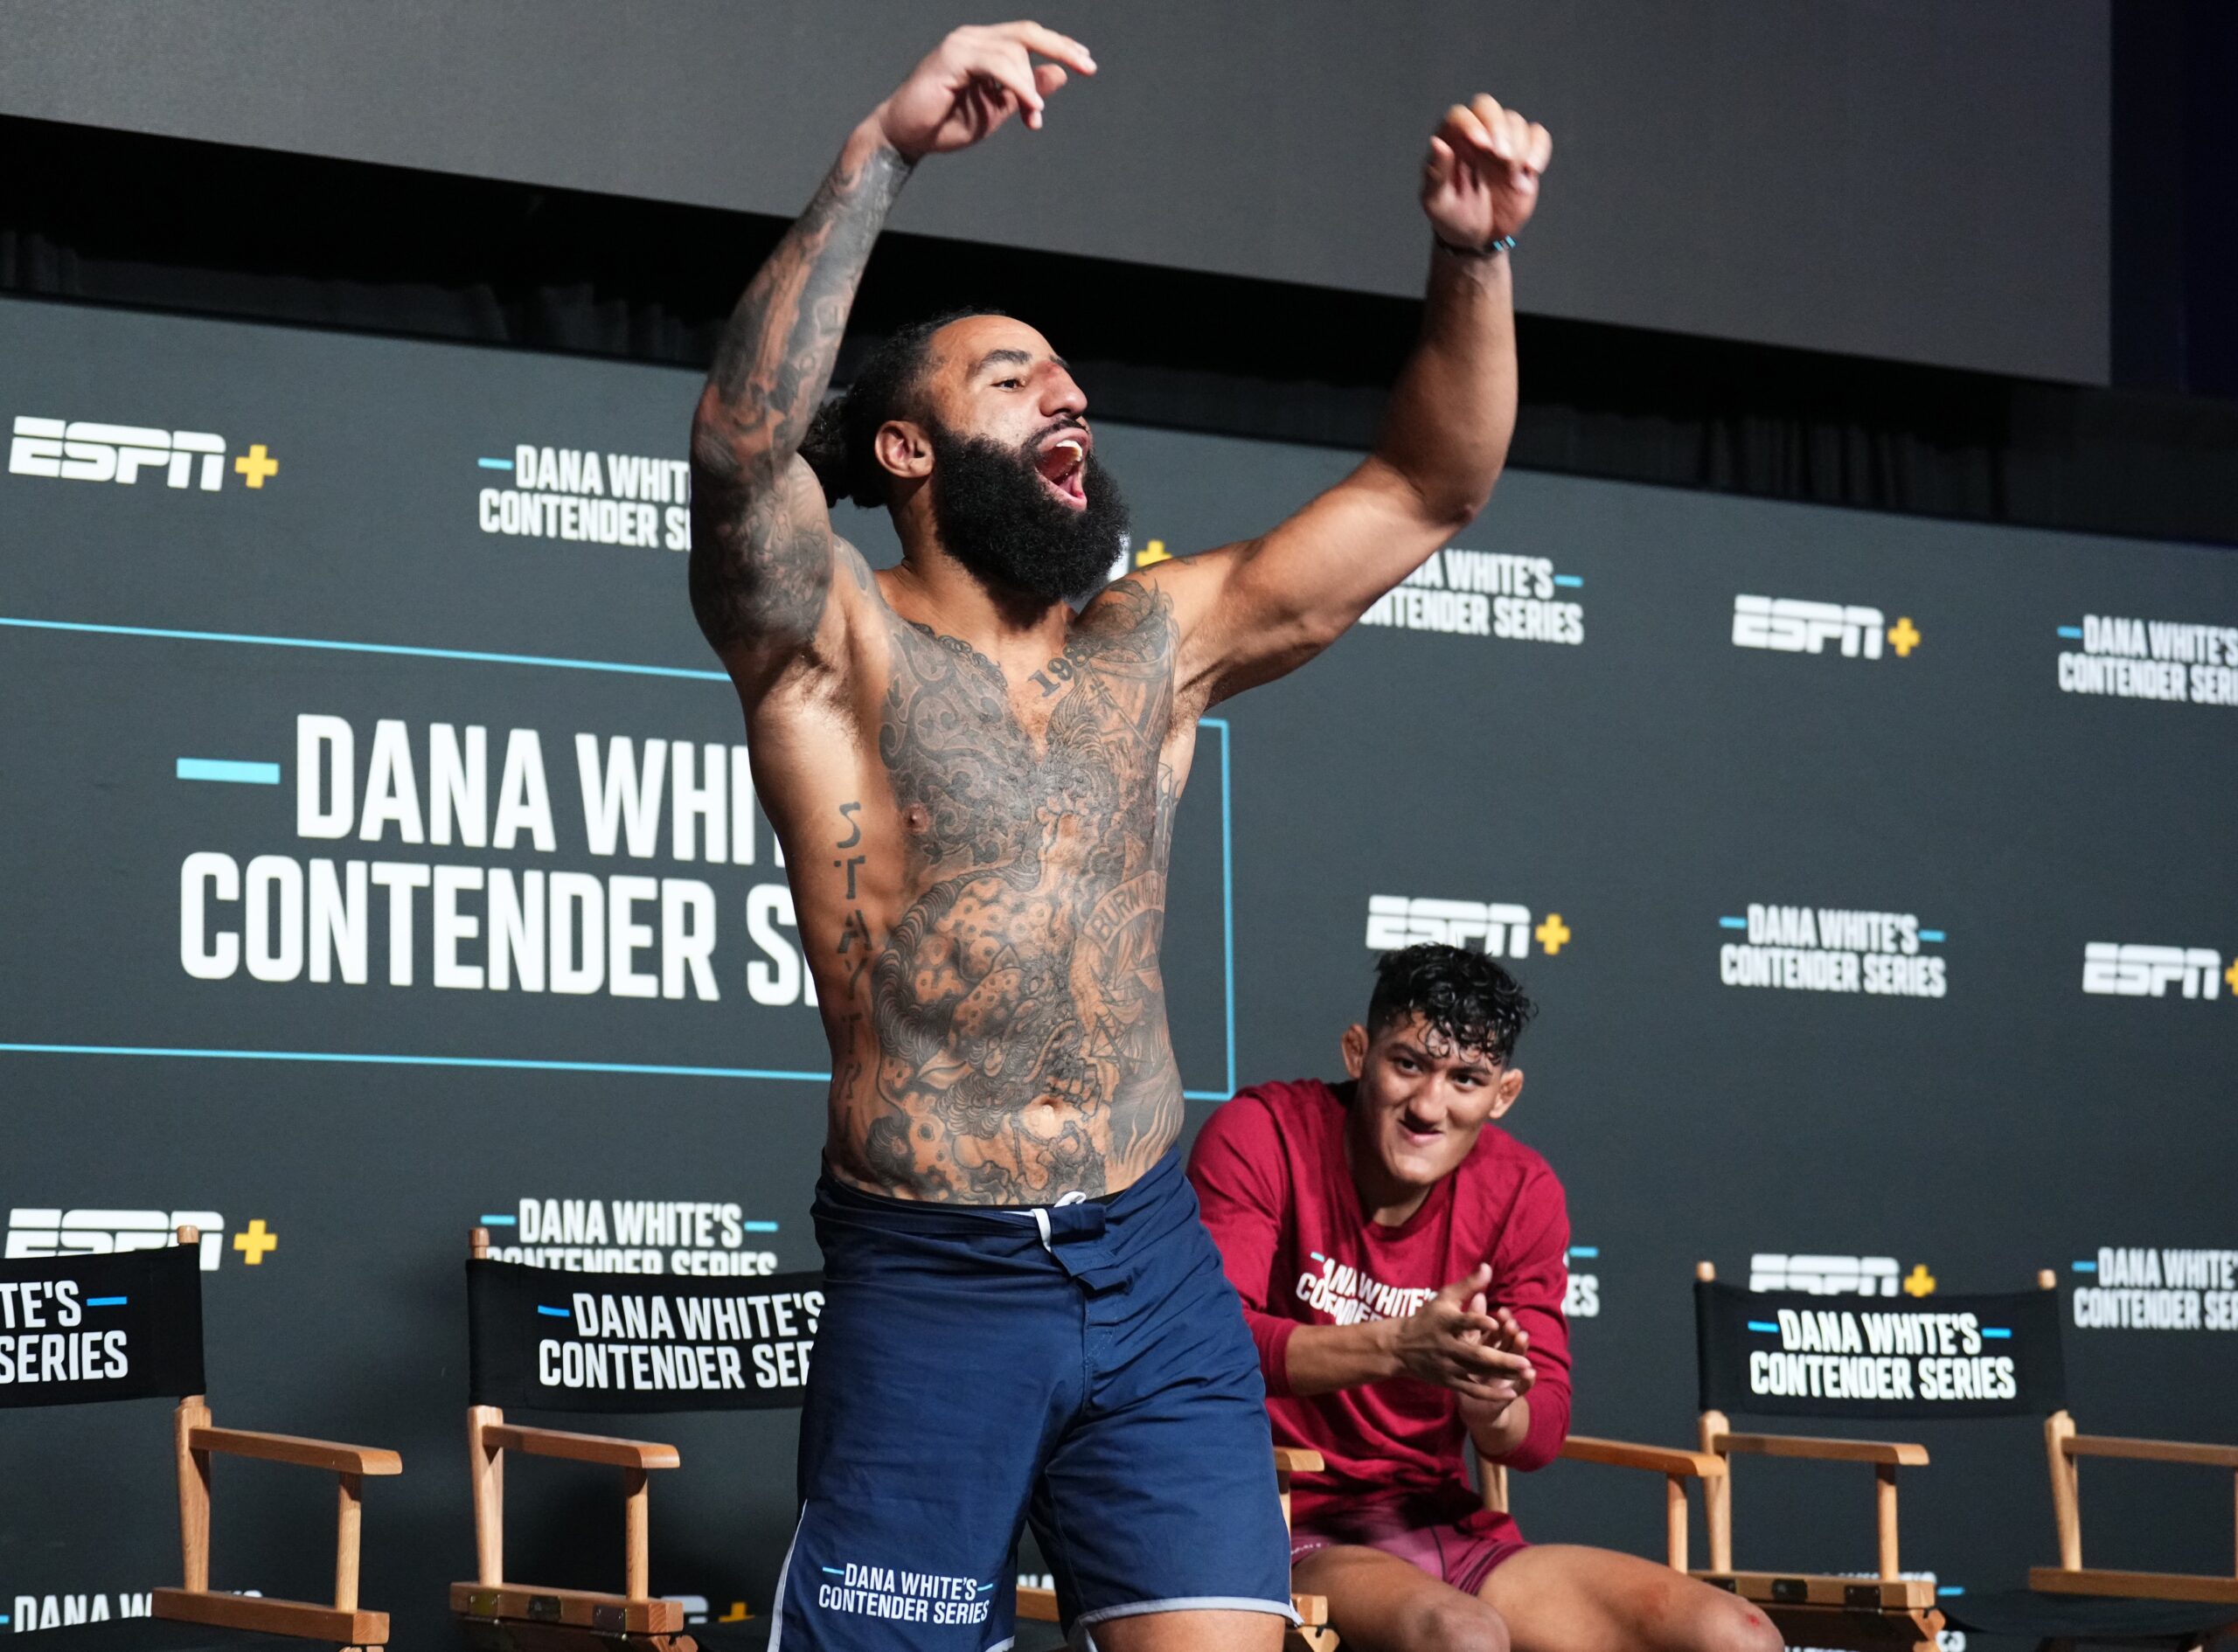 Austen Lane celebrates after his victory on Dana White's Contender Series